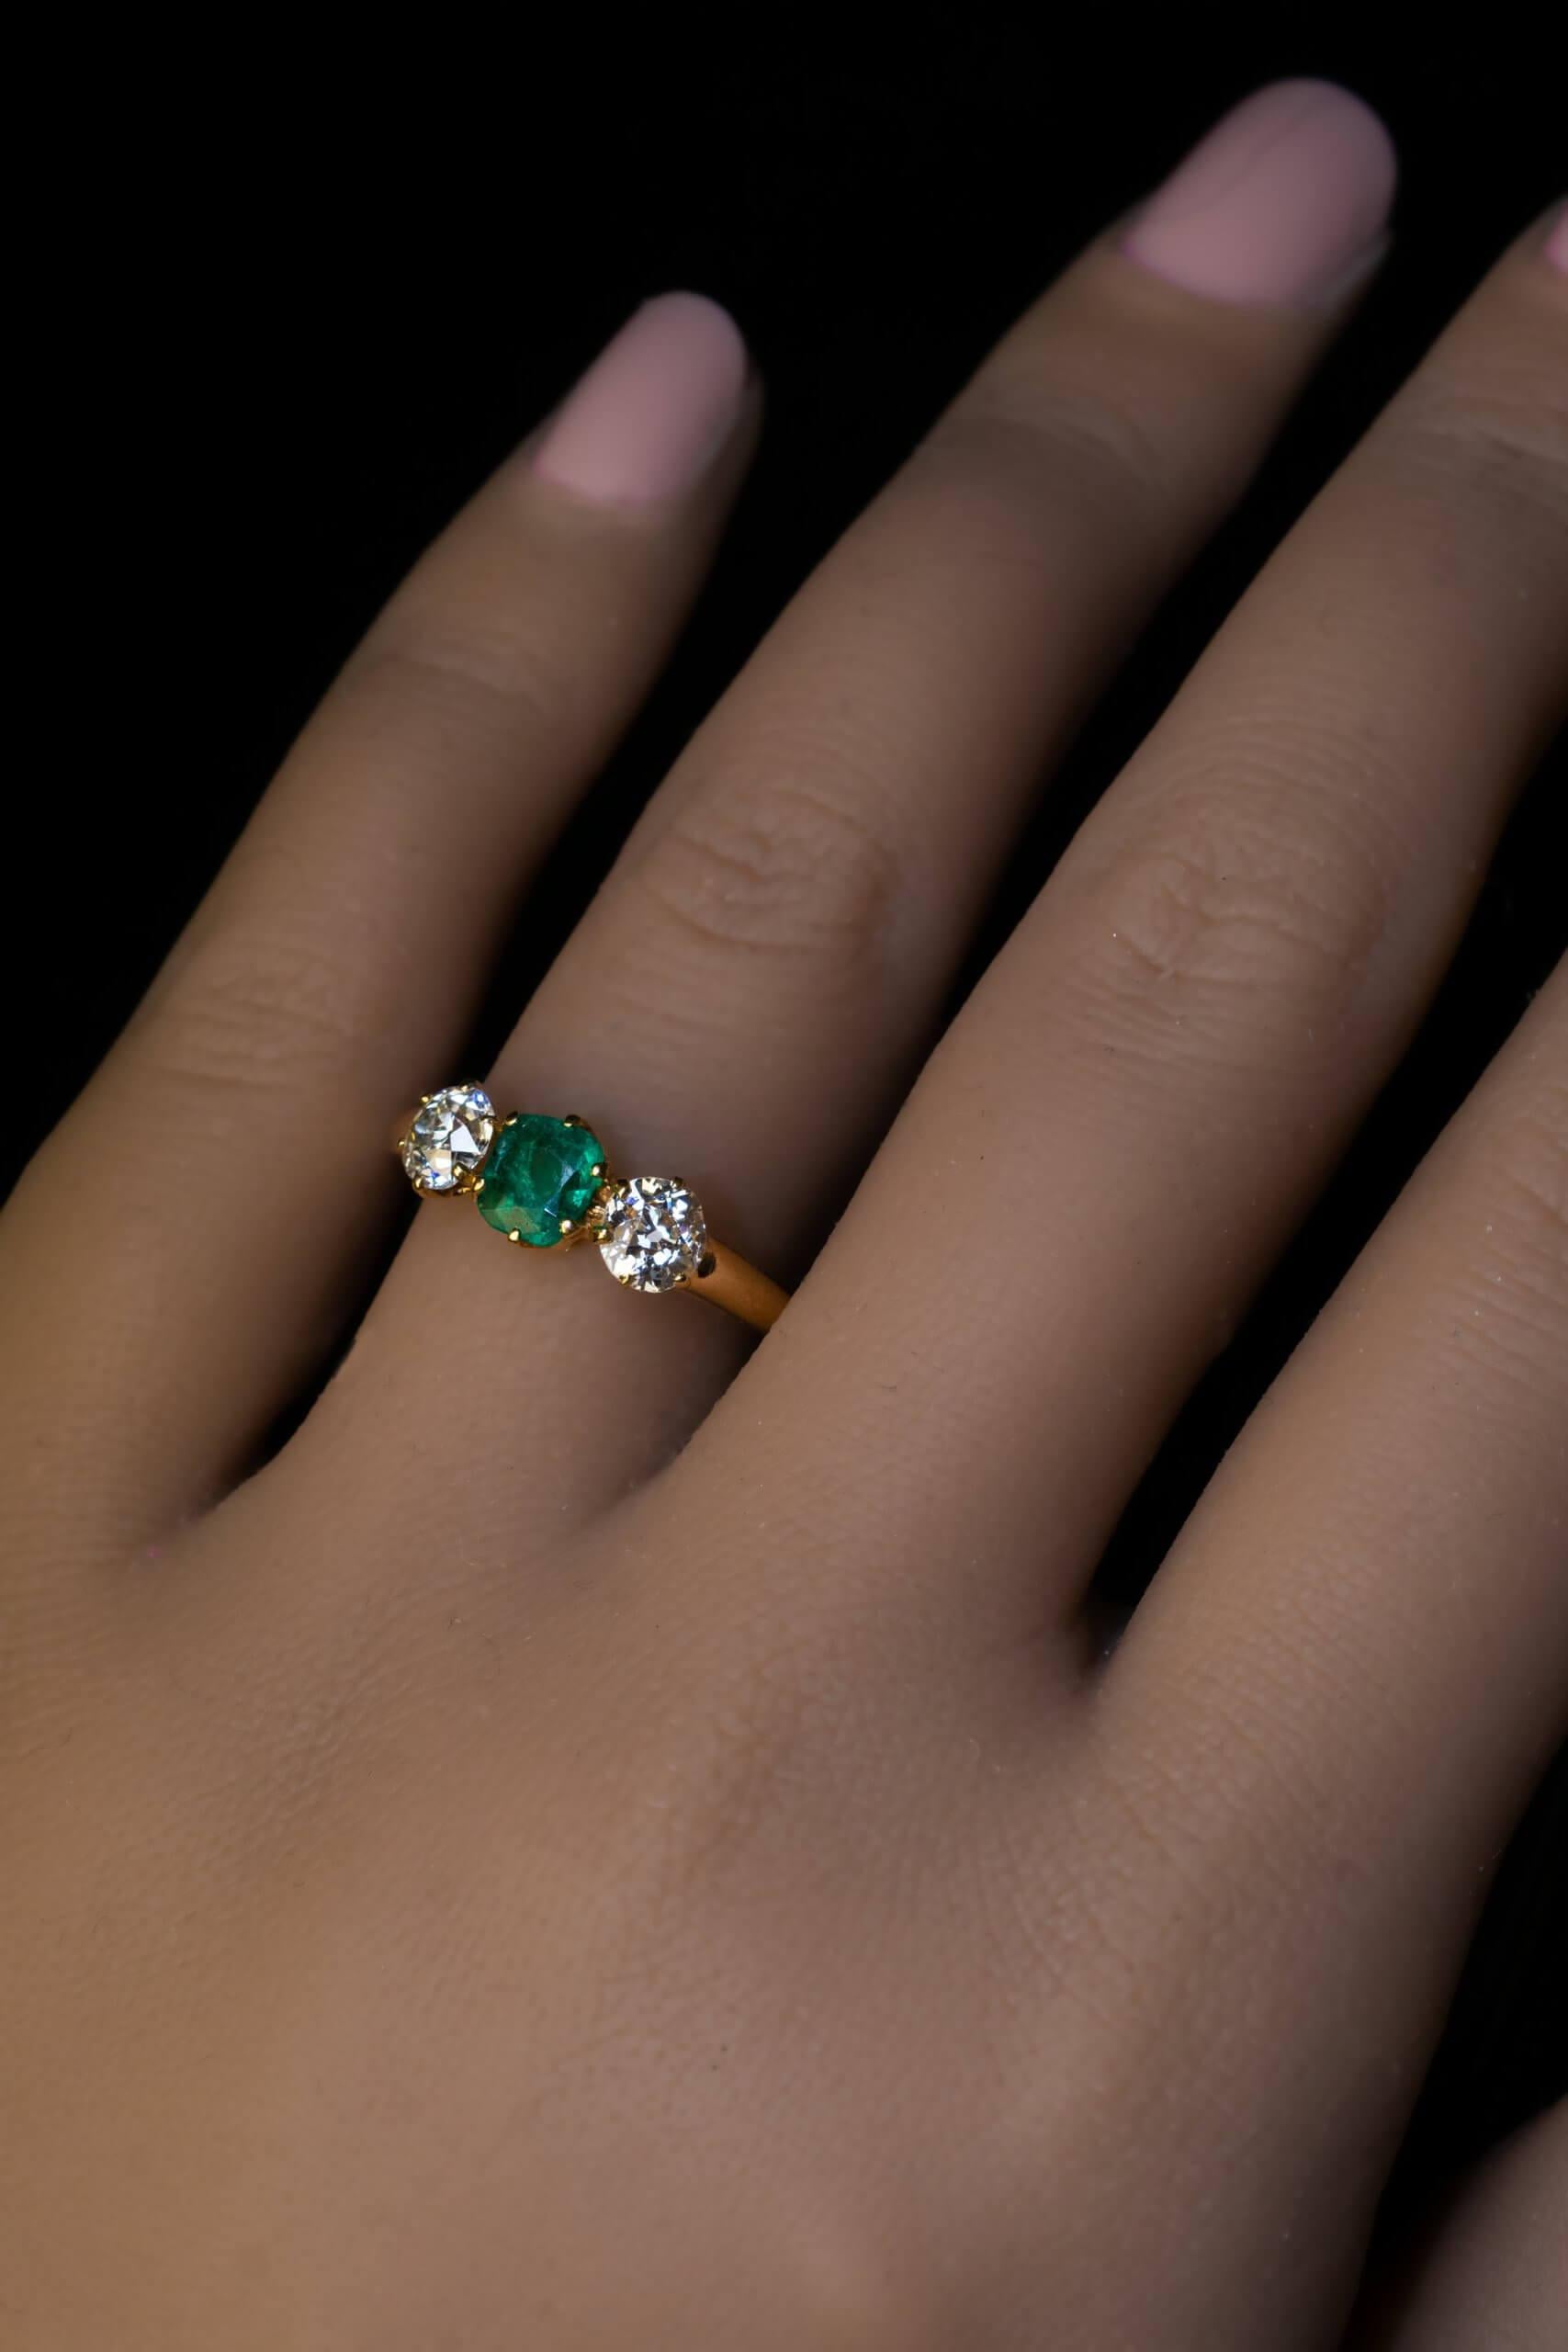 Circa 1890  This classic Victorian era three stone ring is crafted in 14K gold. The ring is centered with a cushion cut emerald of a deep bluish green color (likely of Colombian origin).  The emerald is flanked by two bright white and clean old mine